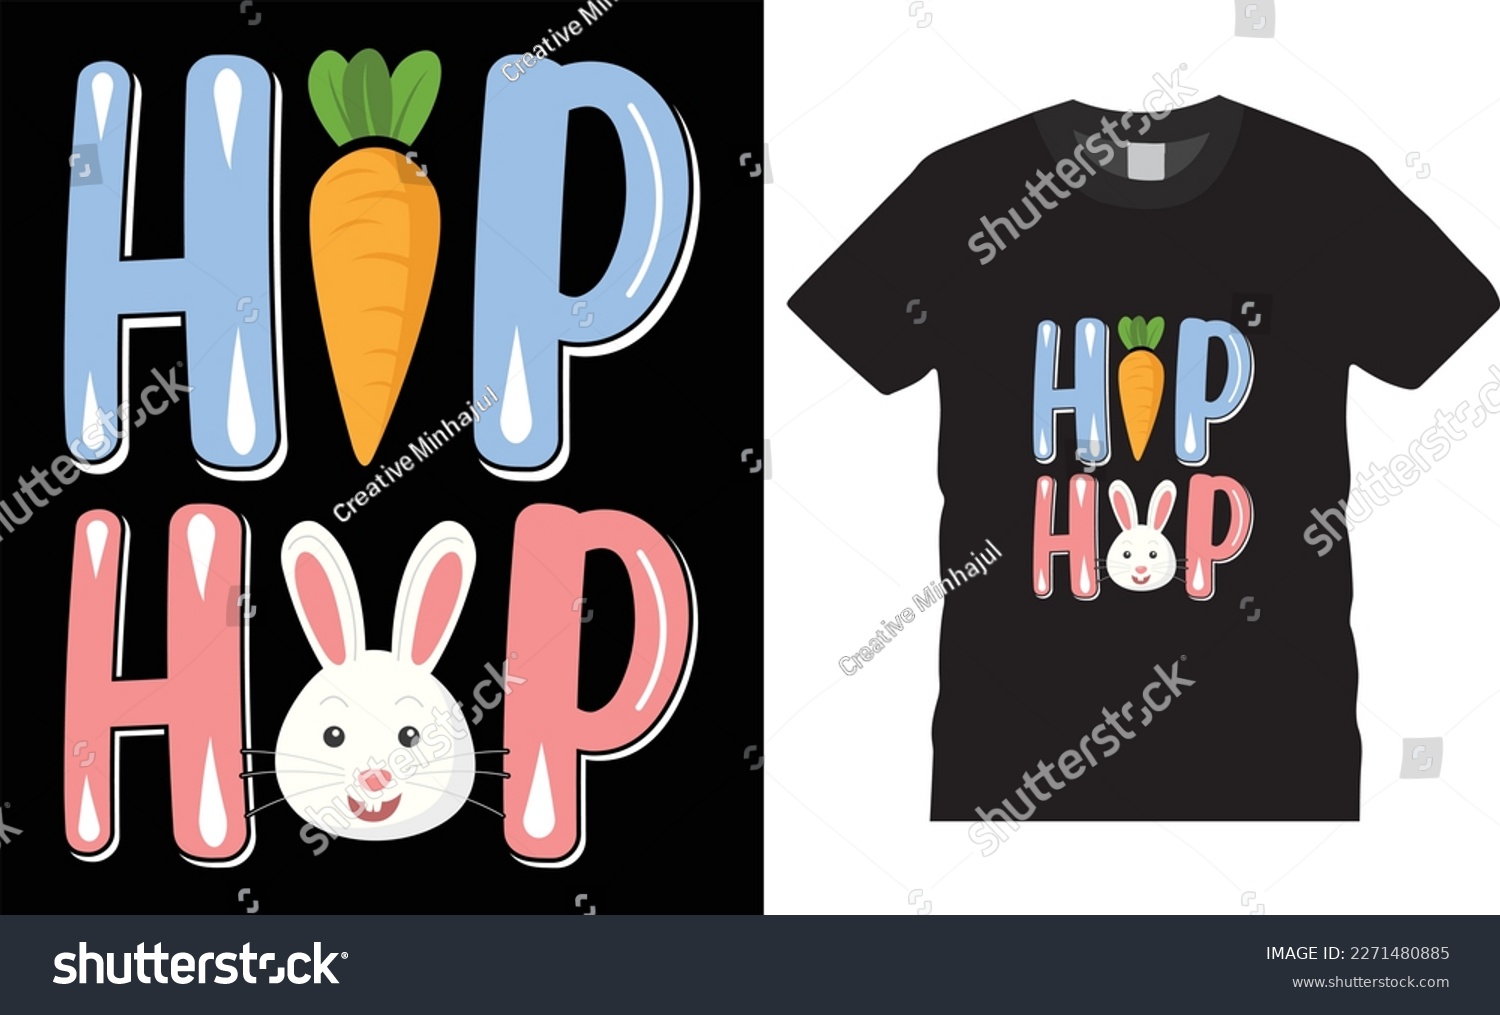 SVG of Happy easter rabbit, bunny tshirt vector design template.Hip hop t-shirt design.Ready to print for apparel, poster, mug and greeting plate illustration. svg